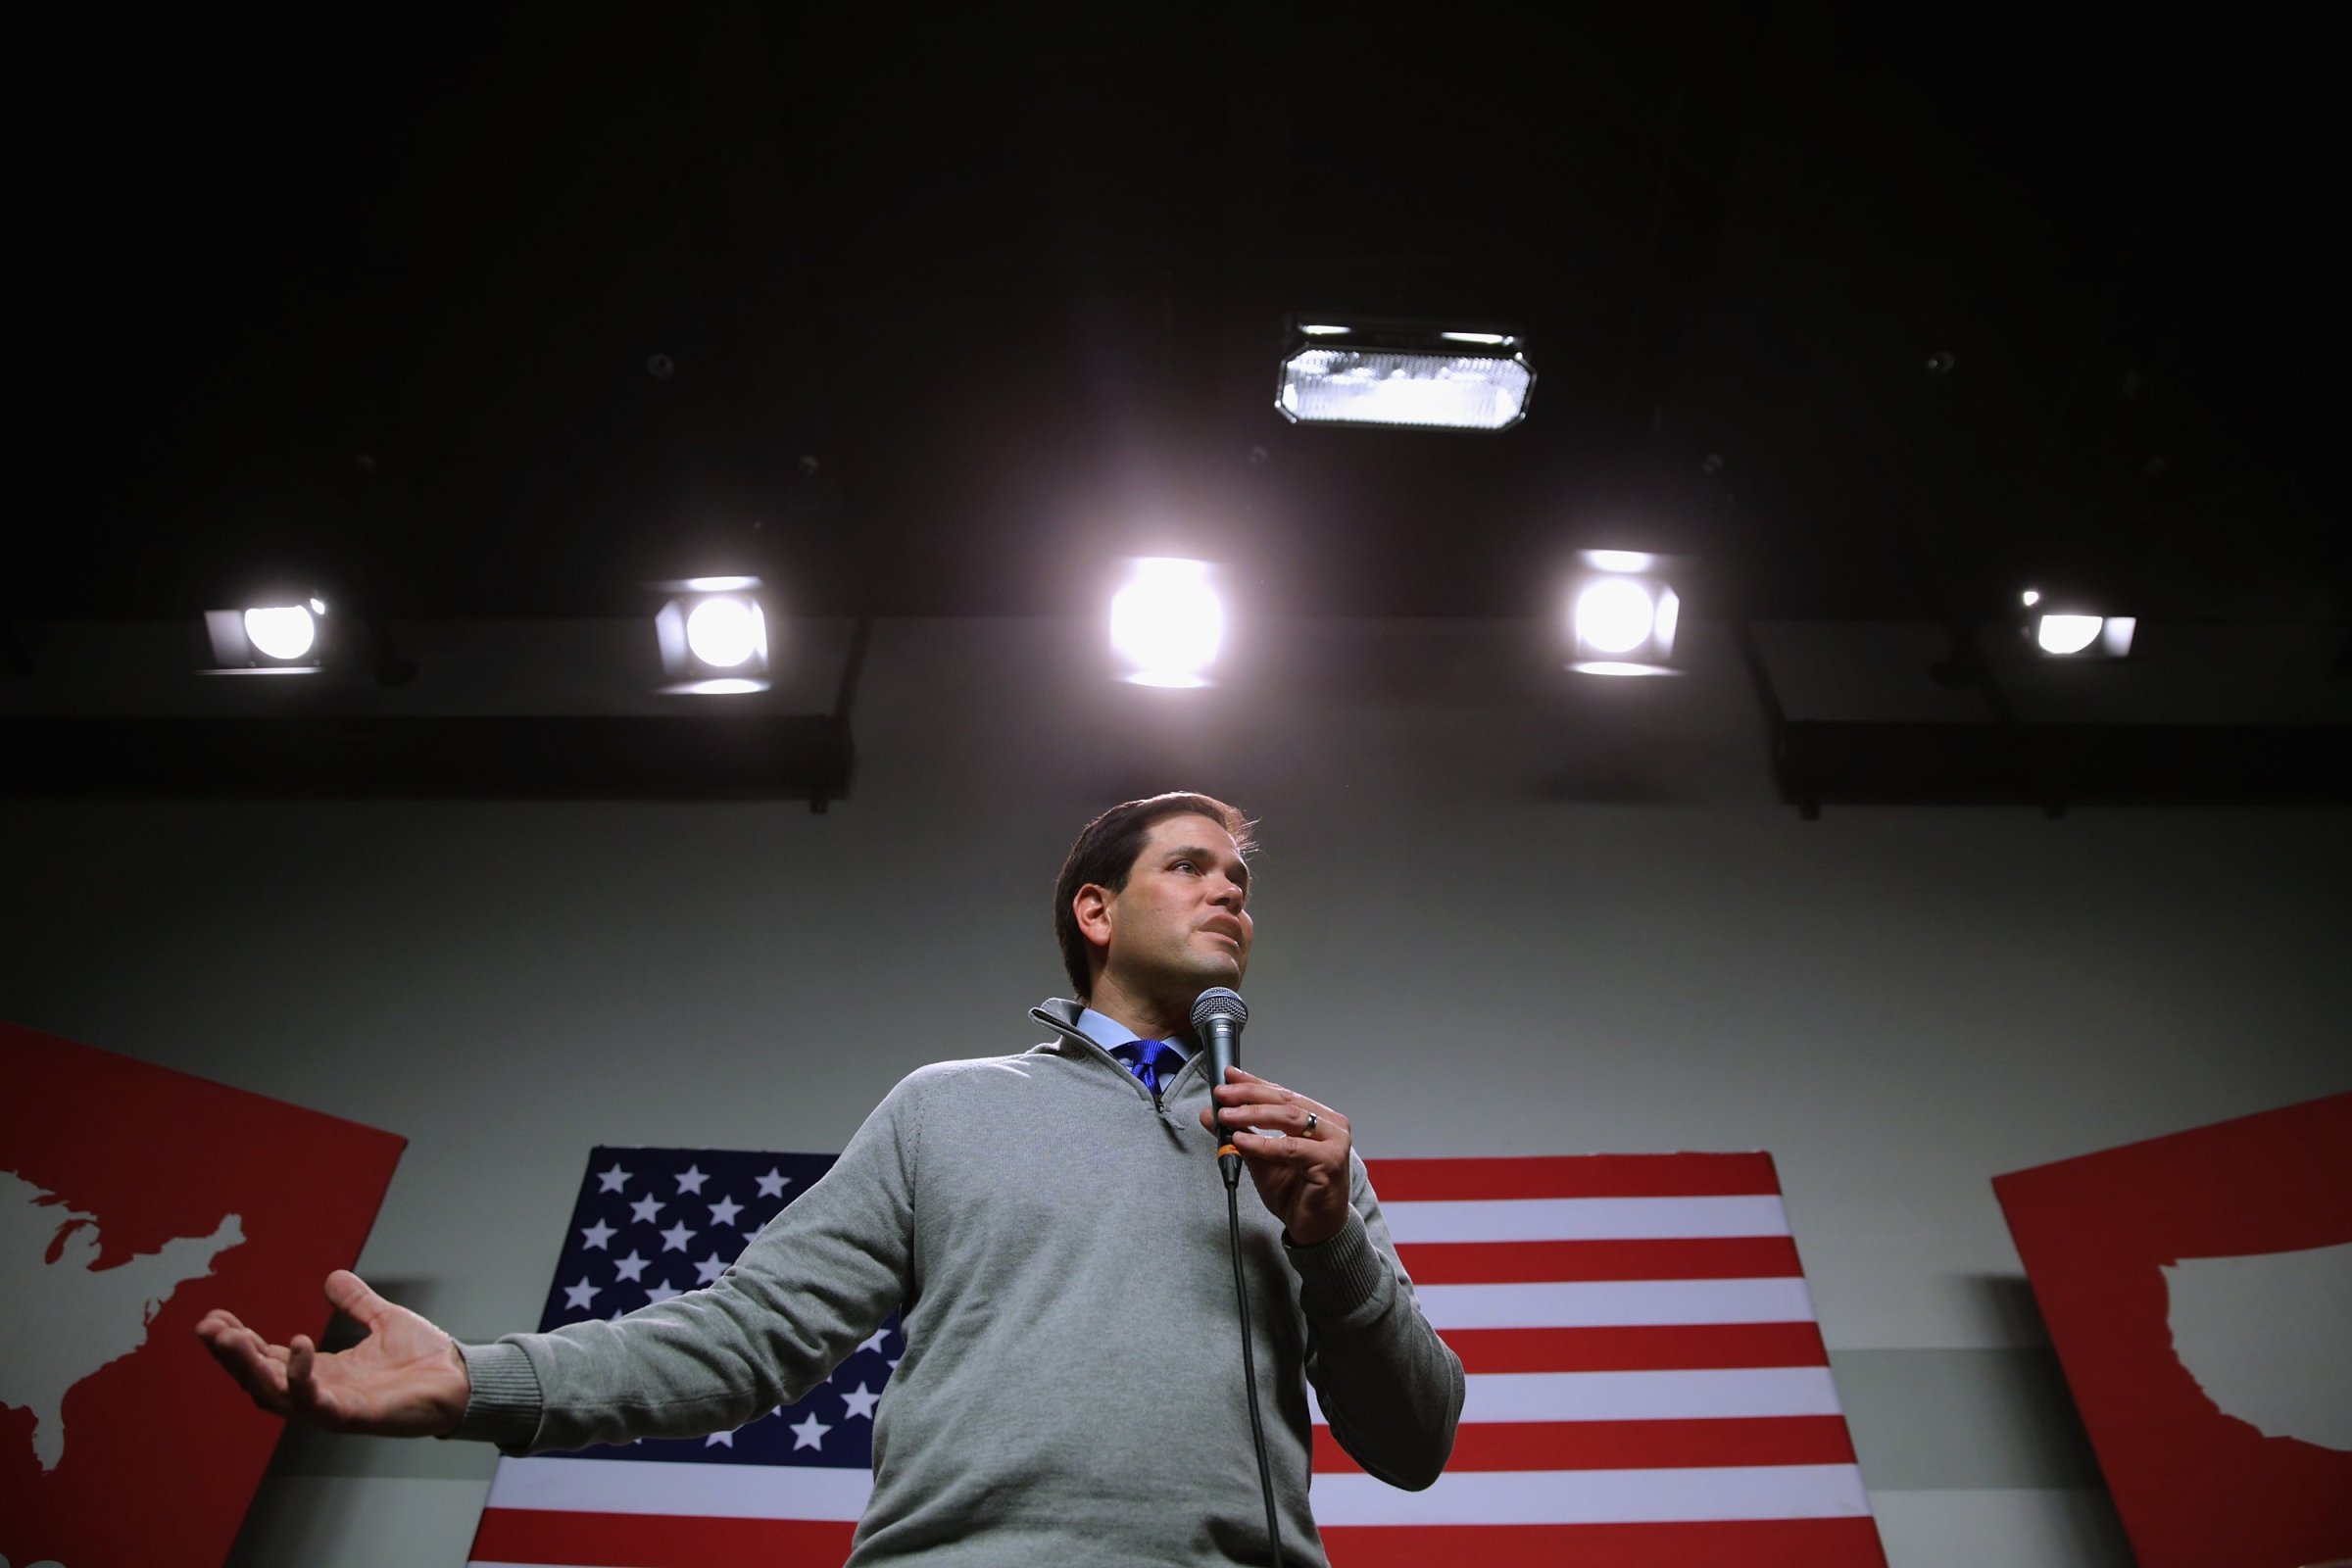 Sen. Marco Rubio holds a campaign town hall event at the New Hampshire Institute of Politics at St. Anselm College in Manchester, N.H. on Feb. 4, 2016.